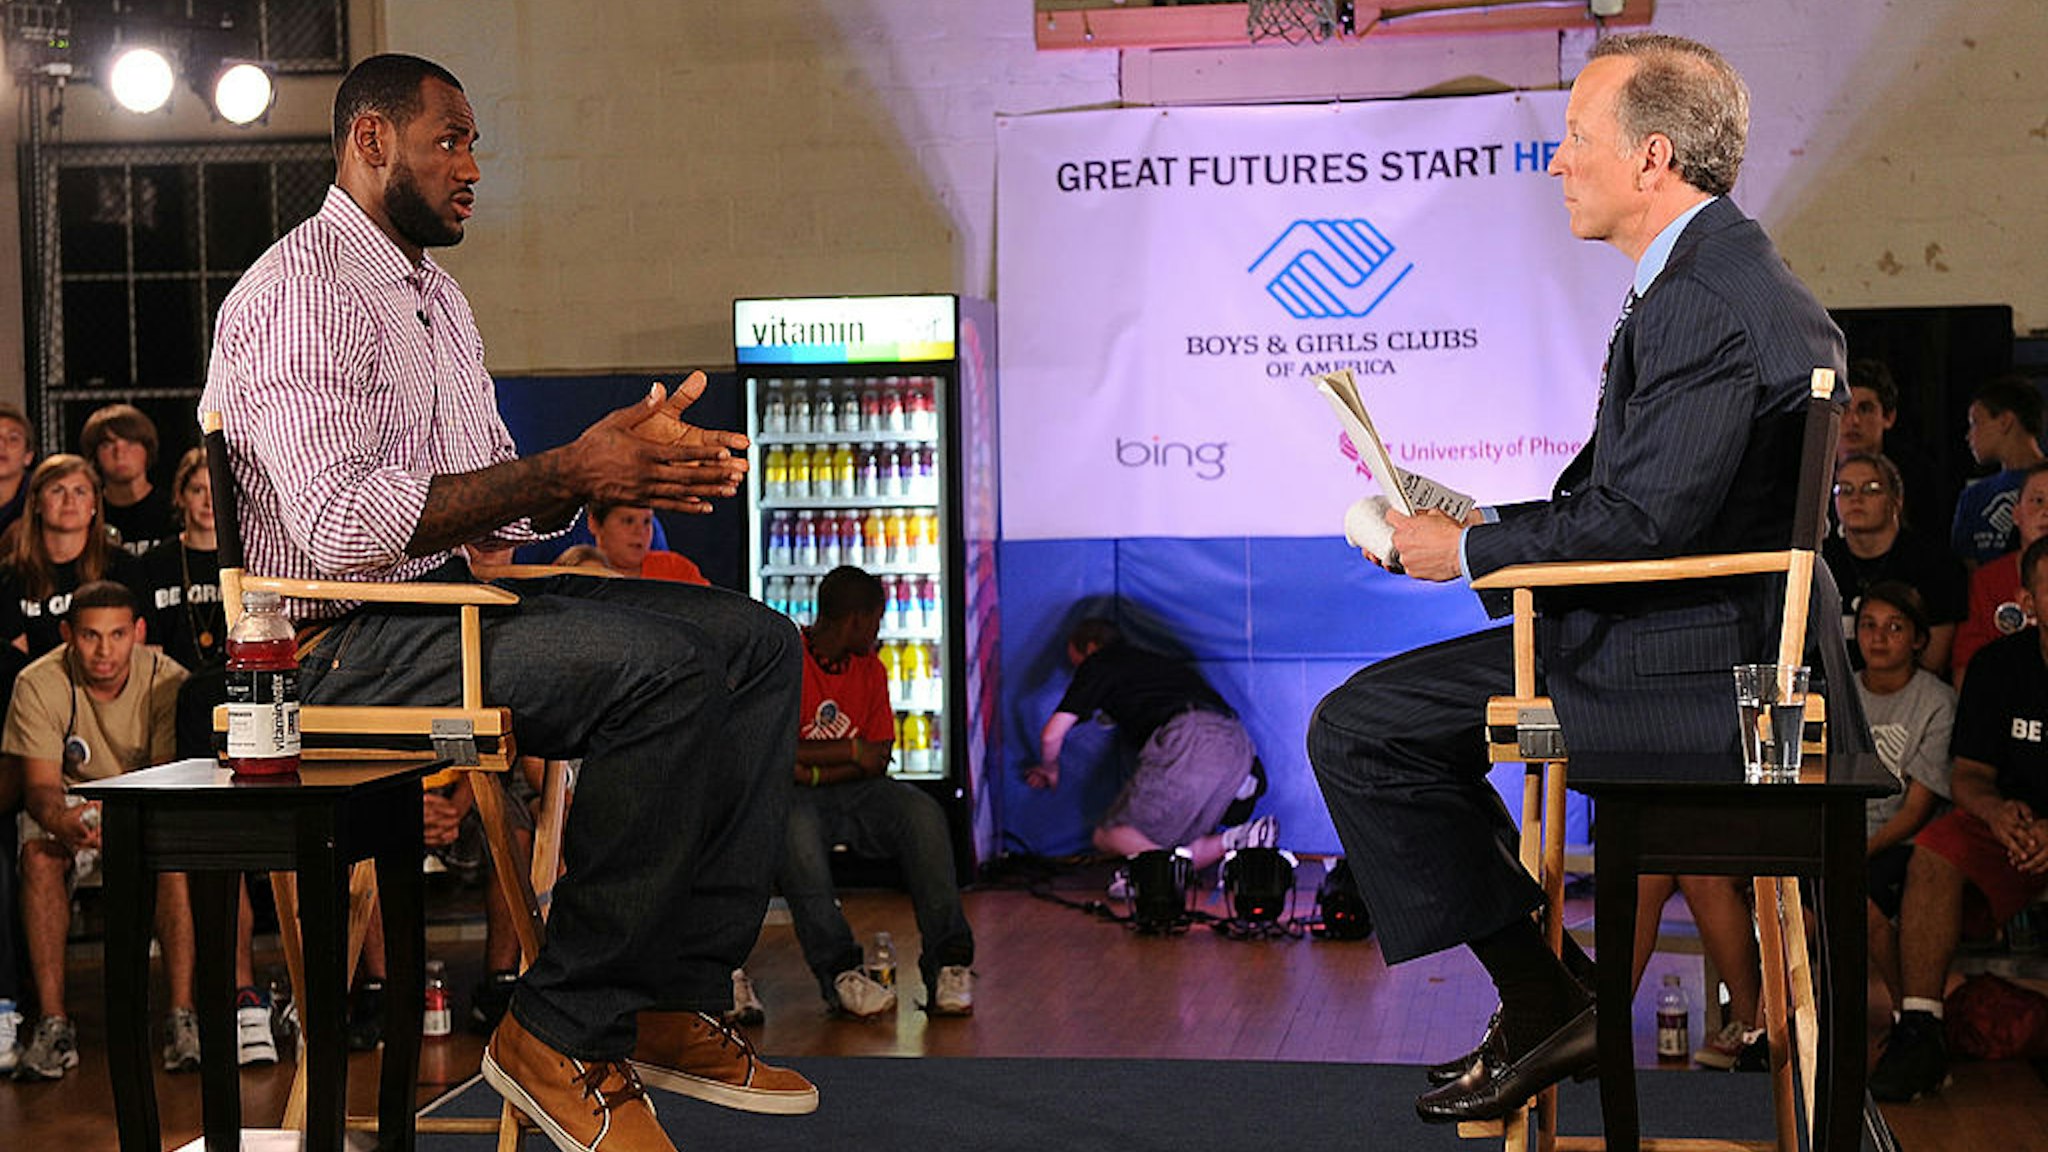 GREENWICH, CT - JULY 08: LeBron James and ESPN's Jim Gray speak at the LeBron James announcement of his future NBA plans at the Boys &amp; Girls Club of America on July 8, 2010 in Greenwich, Connecticut. (Photo by Larry Busacca/Getty Images for Estabrook Group)